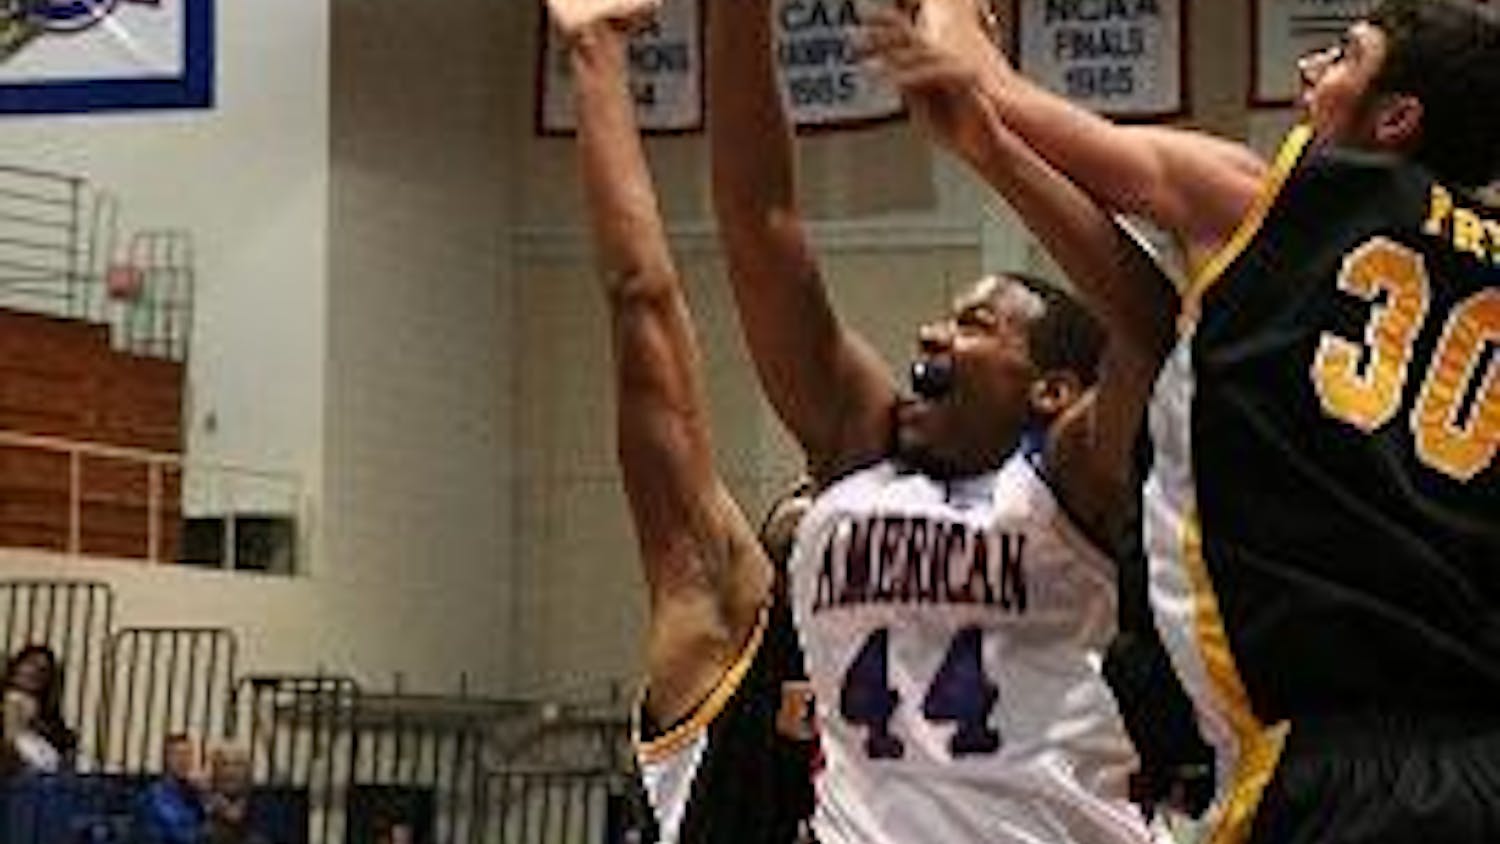 MOVIN' ON UP - Led by junior Jordan Nichols' seven first-half points (seen here in an earlier game against UMBC), the Eagles defeated the Crusaders 62-46 Wednesday night for the first time since the 2003-04 season. 